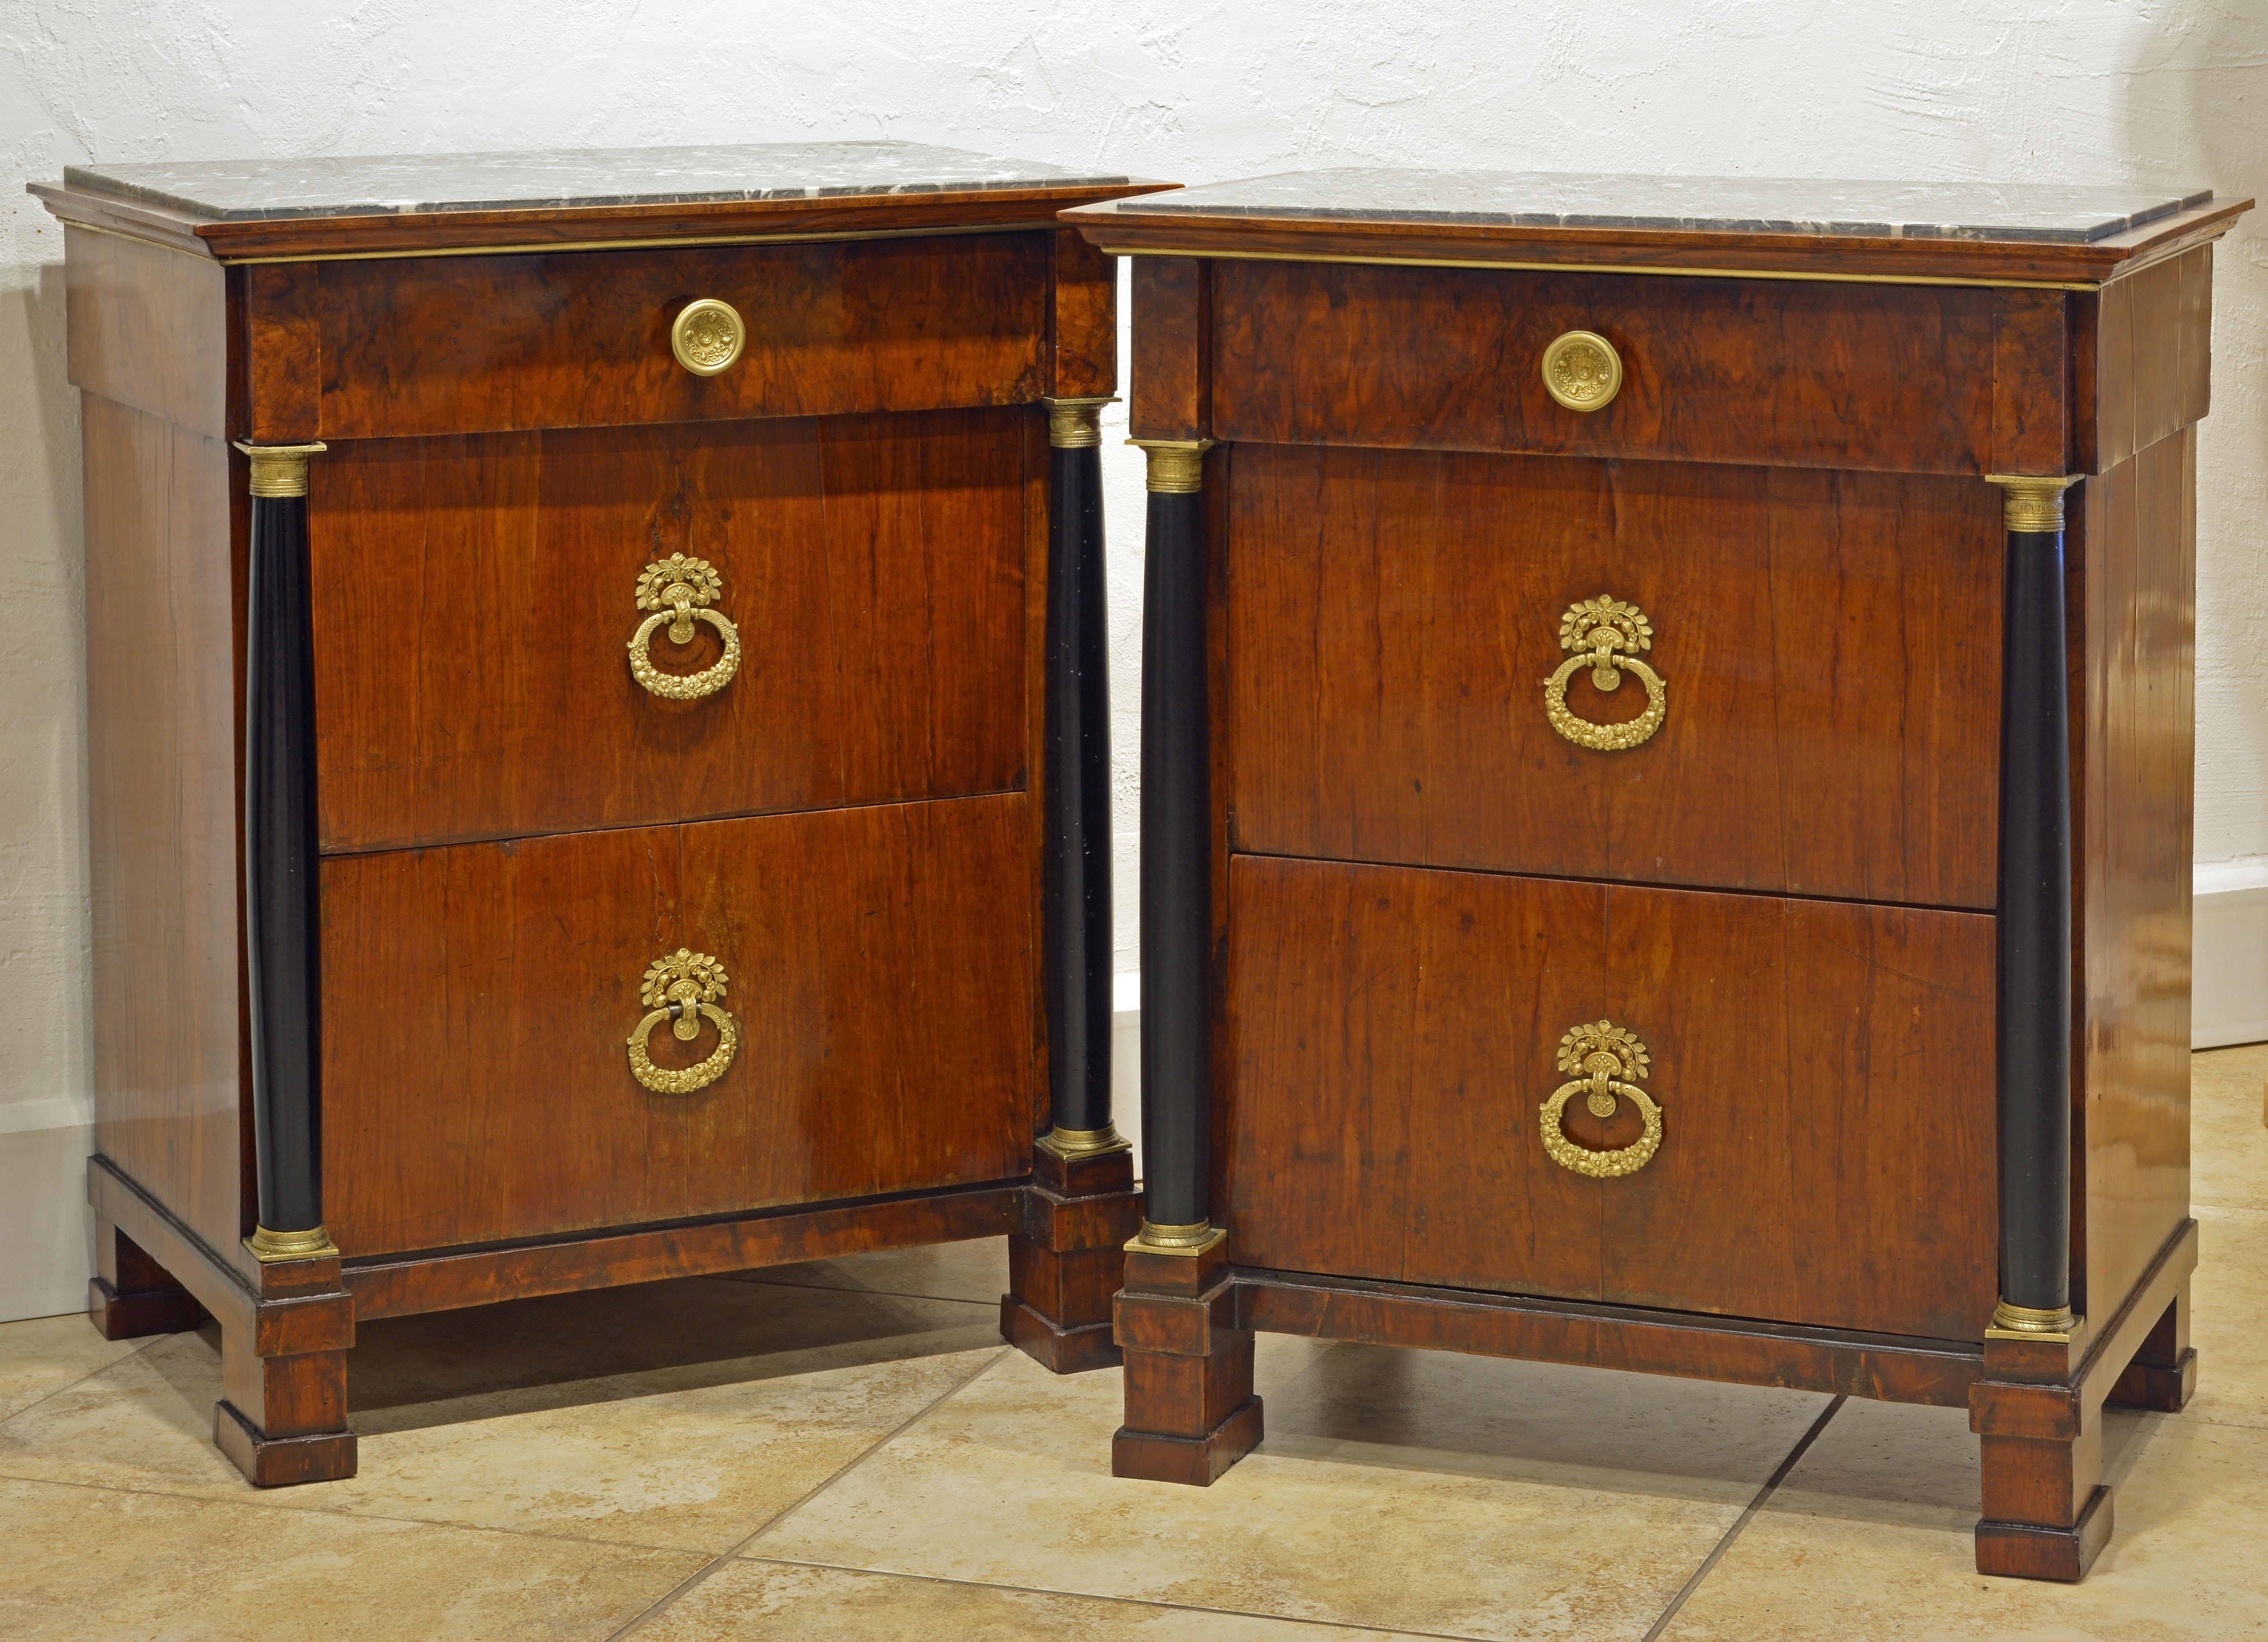 Fashioned in the French Empire style and of that period these Italian commodes feature recessed marble tops above a frieze drawer and two deep drawers flanked by ebonized gilt bronze mounted classical columns.